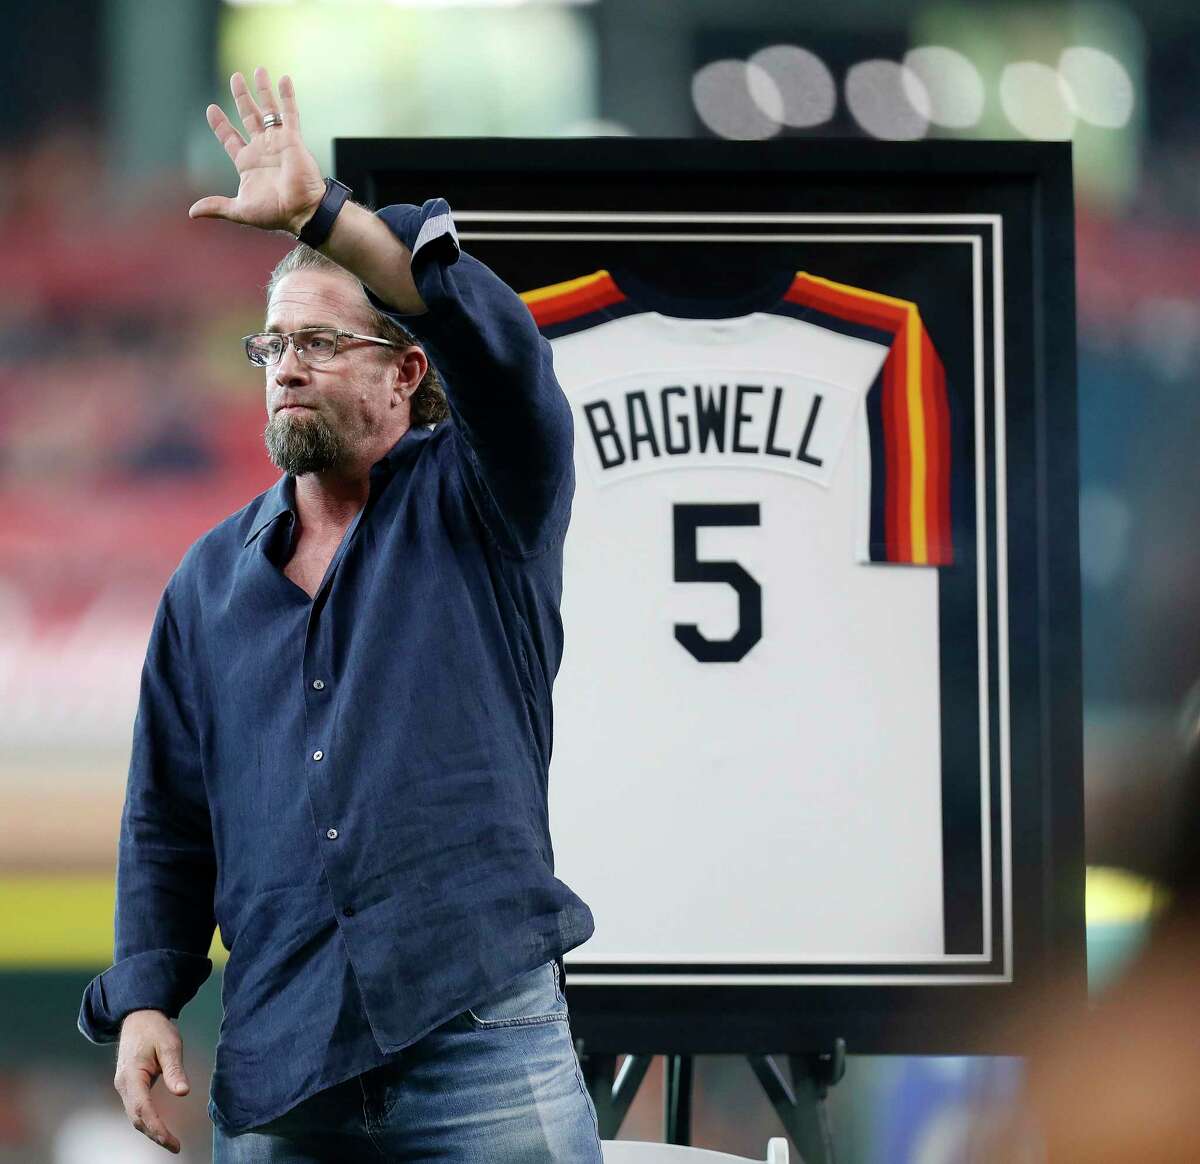 Newly minted Hall of Famer Jeff Bagwell said Saturday at Minute Maid Park he was happy to share the honor with Houstonians.﻿